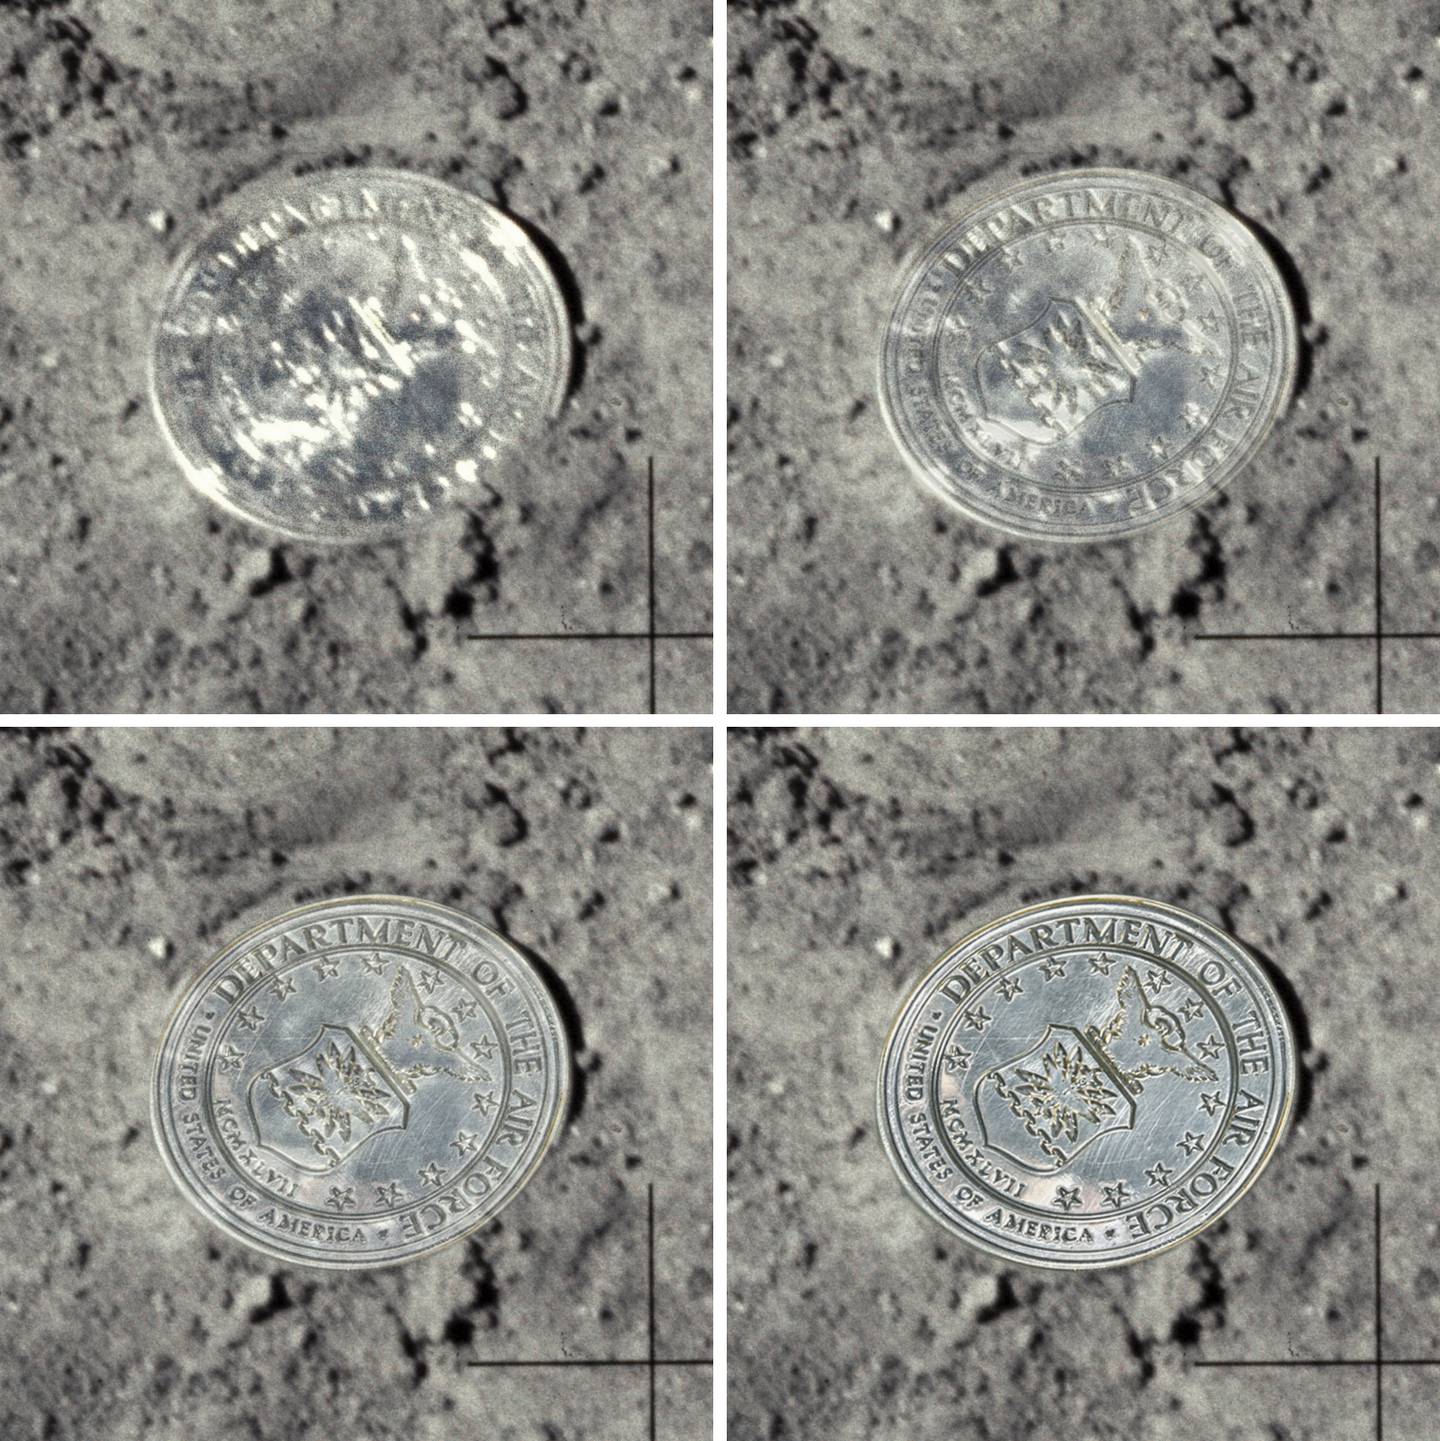 A compilation of photos of an Air Force 25th anniversary commemoration coin that was laid on the moon during Apollo 16 in April 1972, overlaid with the coin's design to show its detail. Space imagery expert Andy Saunders remastered the image of the coin. (NASA/Johnson Space Center/Arizona State University/Andy Saunders)